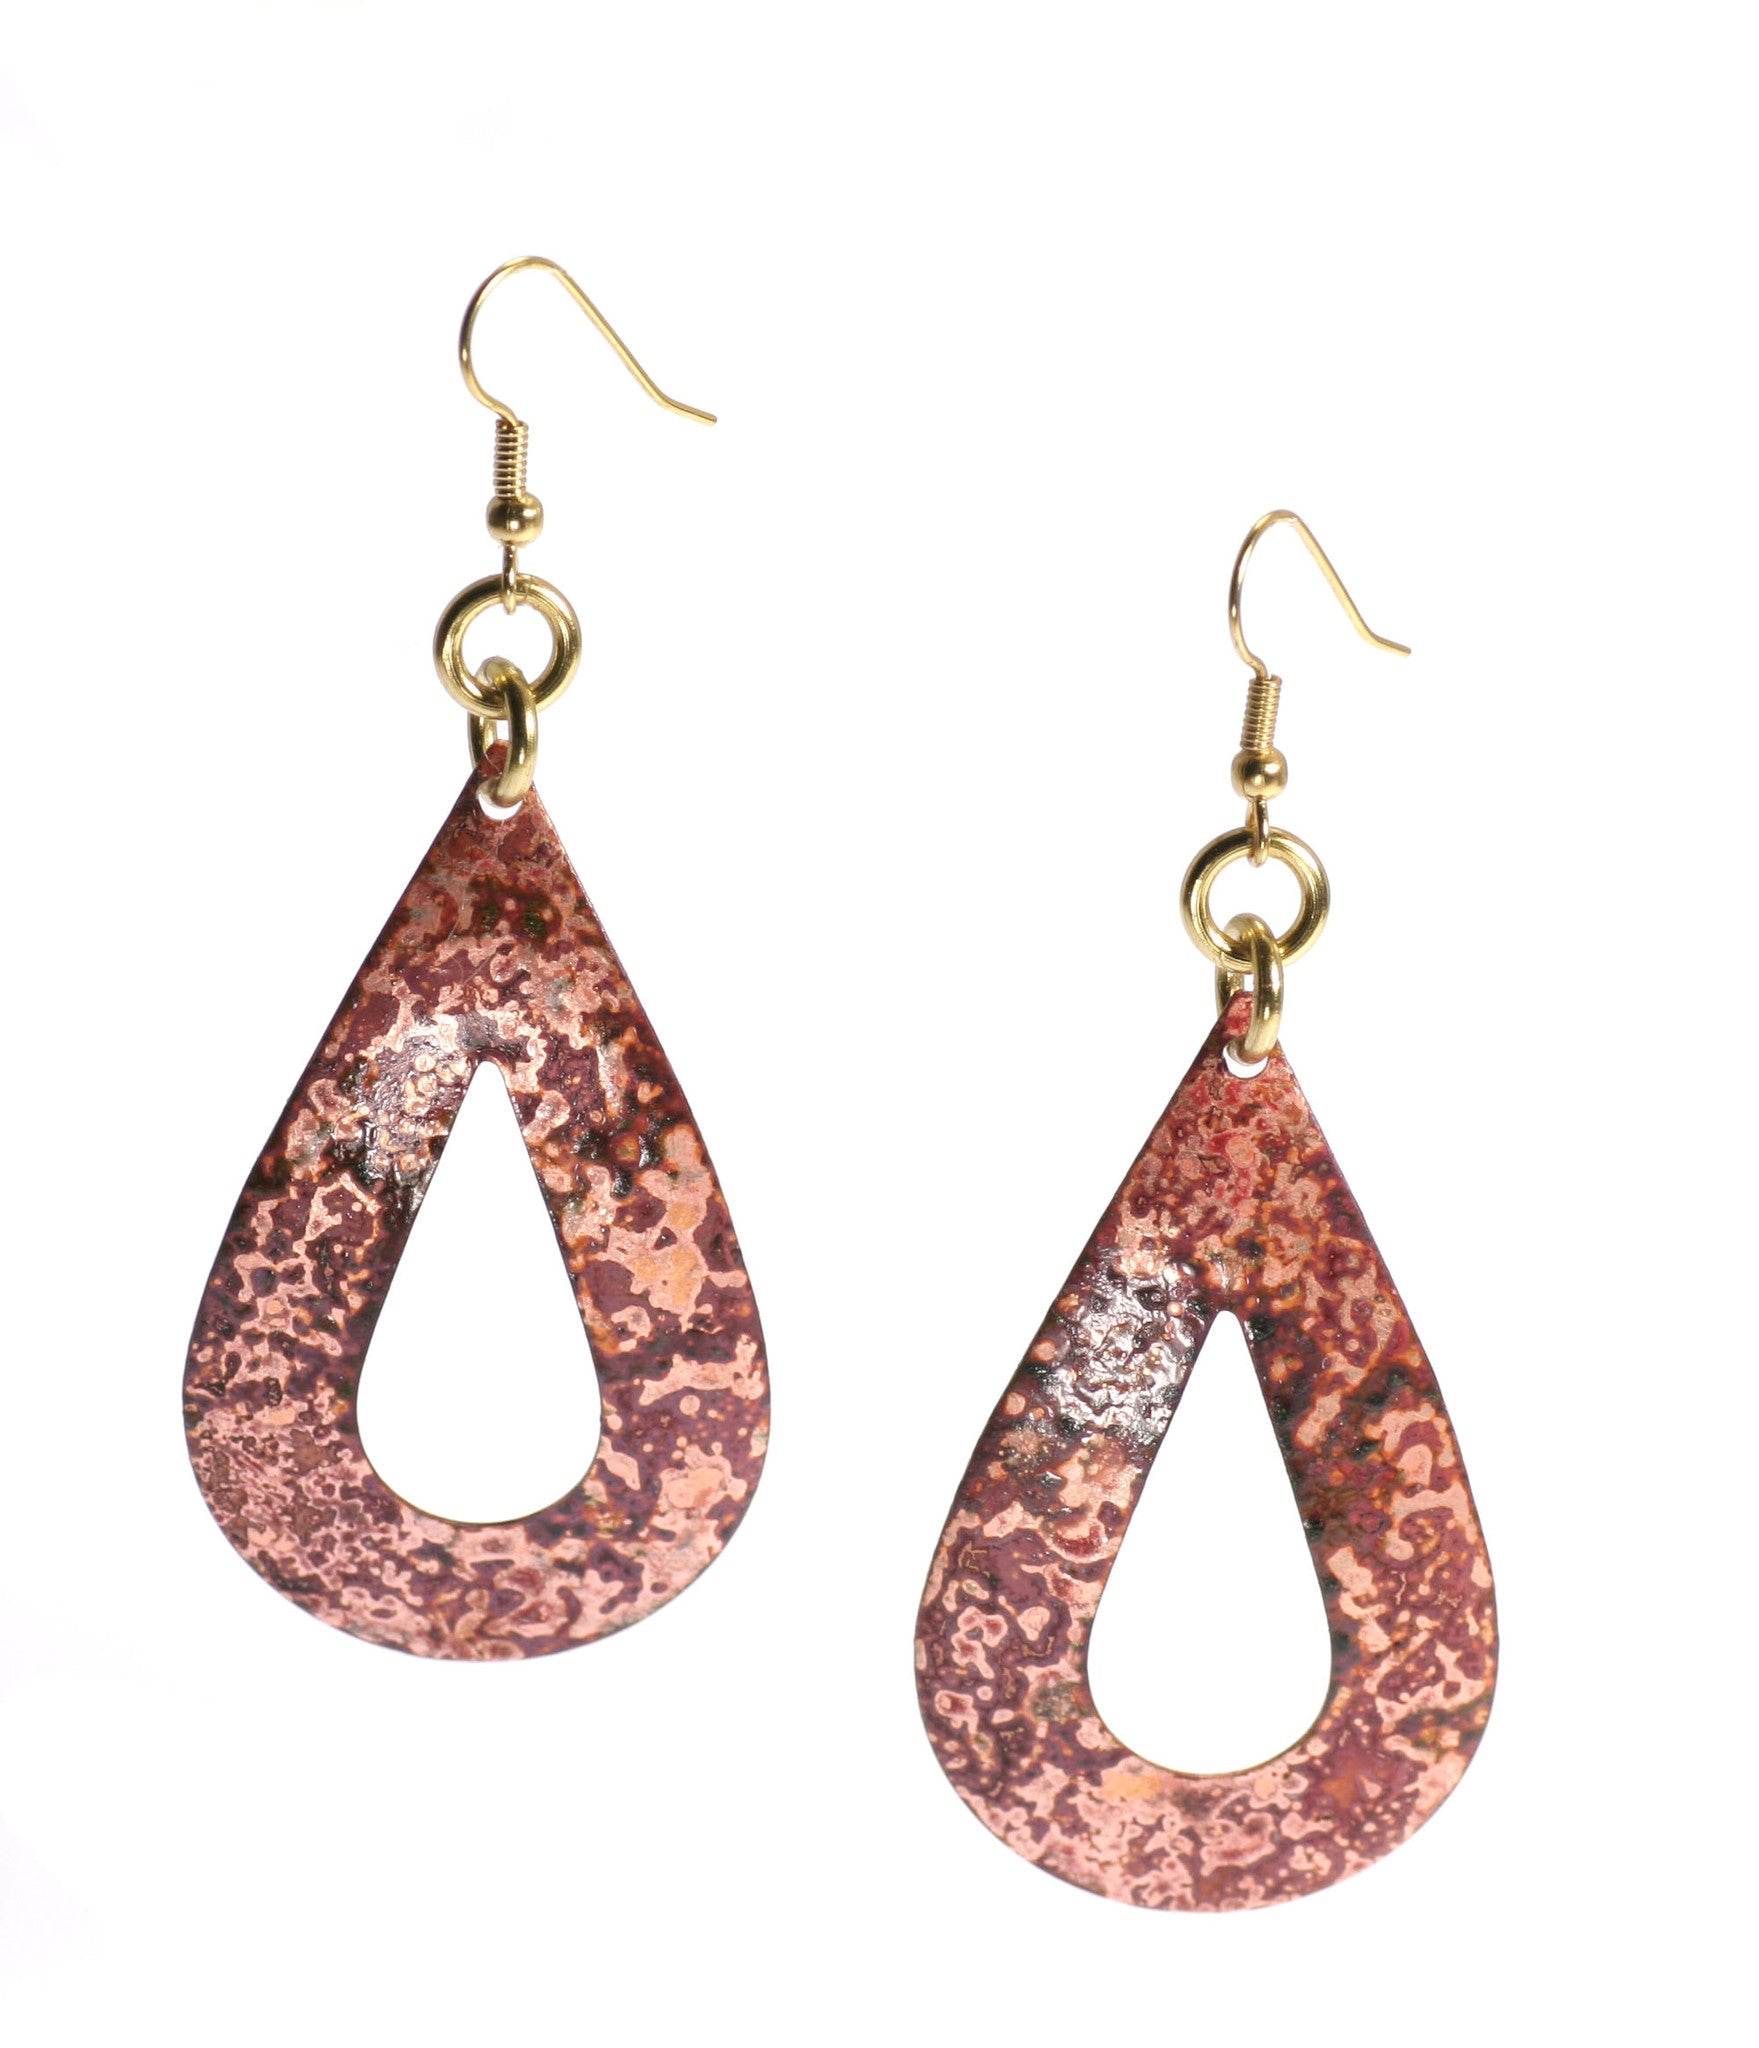 Get Over 30% Off Red Patinated Copper Tear Drop Earrings on Amazon.com!